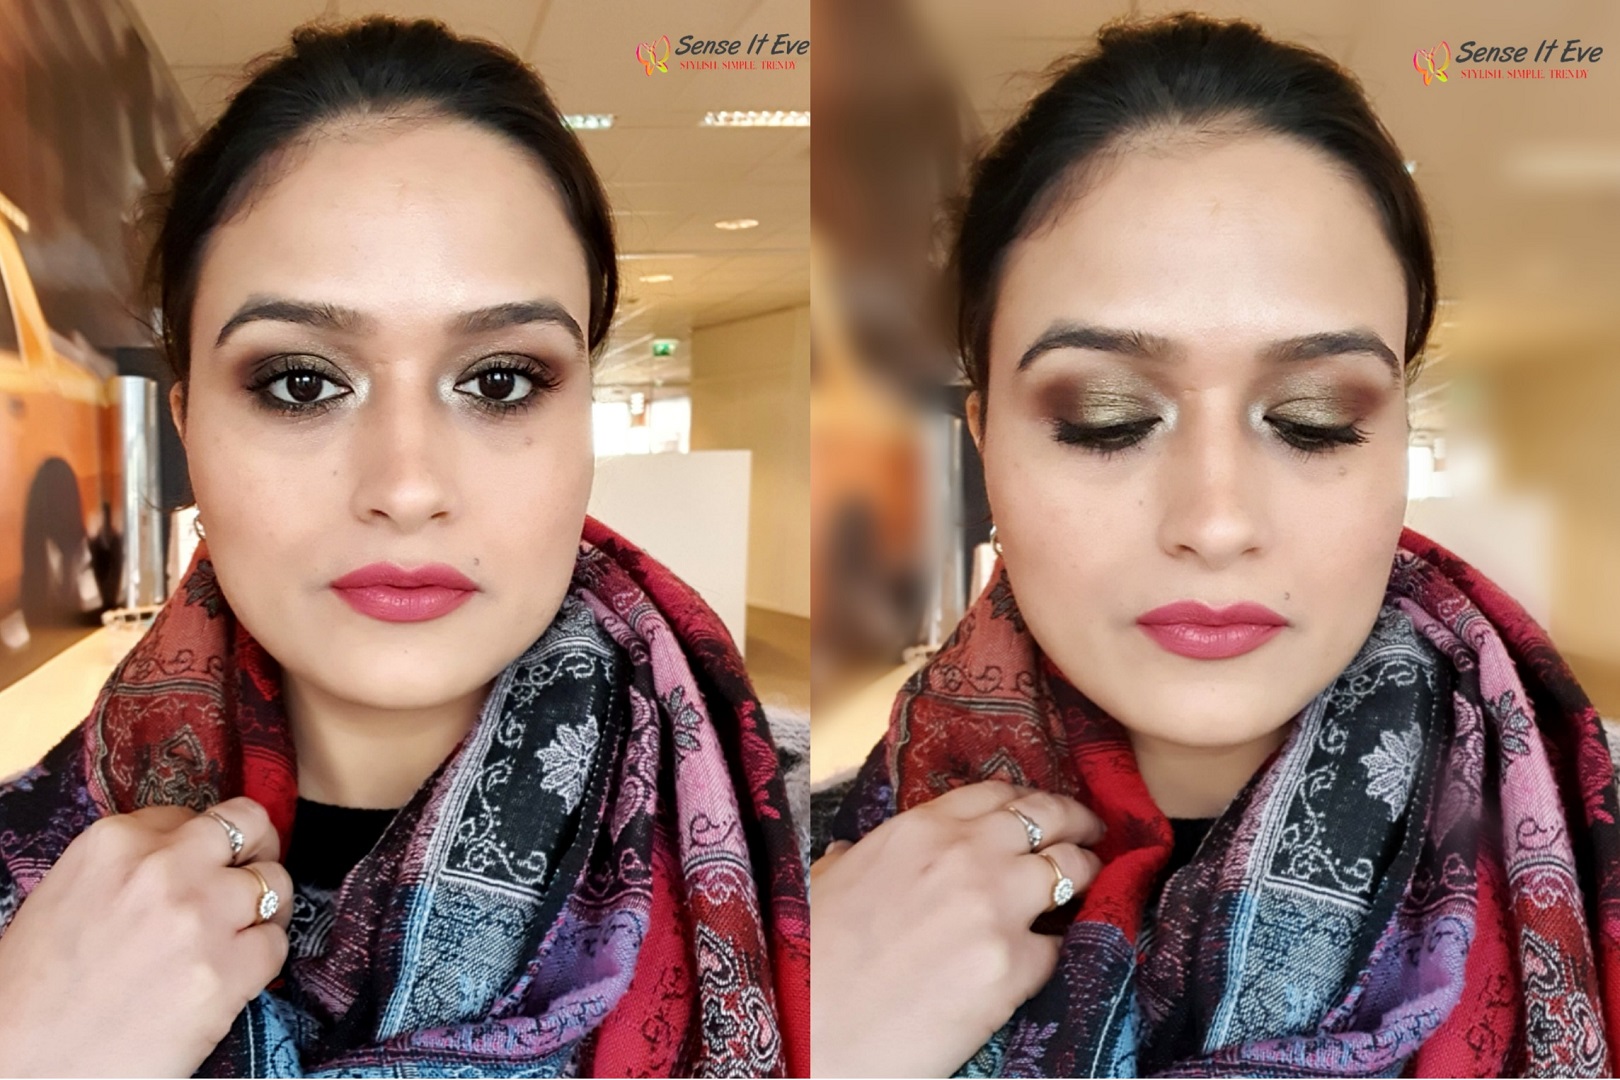 Lakme 9 to 5 Eyeshadow Quartet Tanjore Rush Makeup look 3 Sense It Eve Lakme 9 to 5 Eyeshadow Quartet Tanjore Rush : Review & Swatches